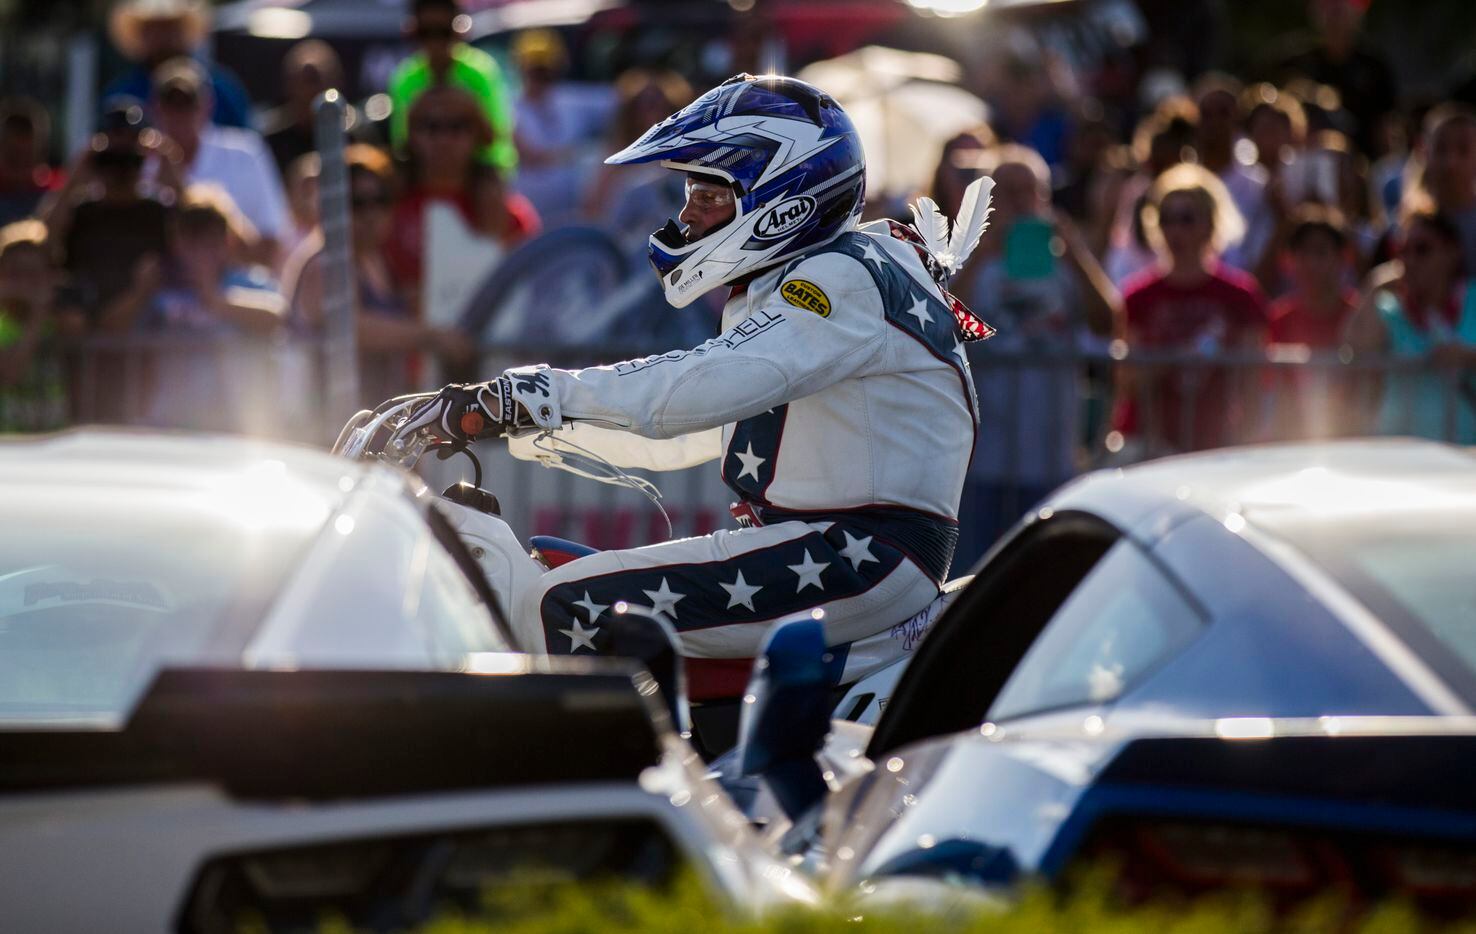 Daredevil Robbie Knievel prepares to jump over 18 Corvettes during a celebration and...